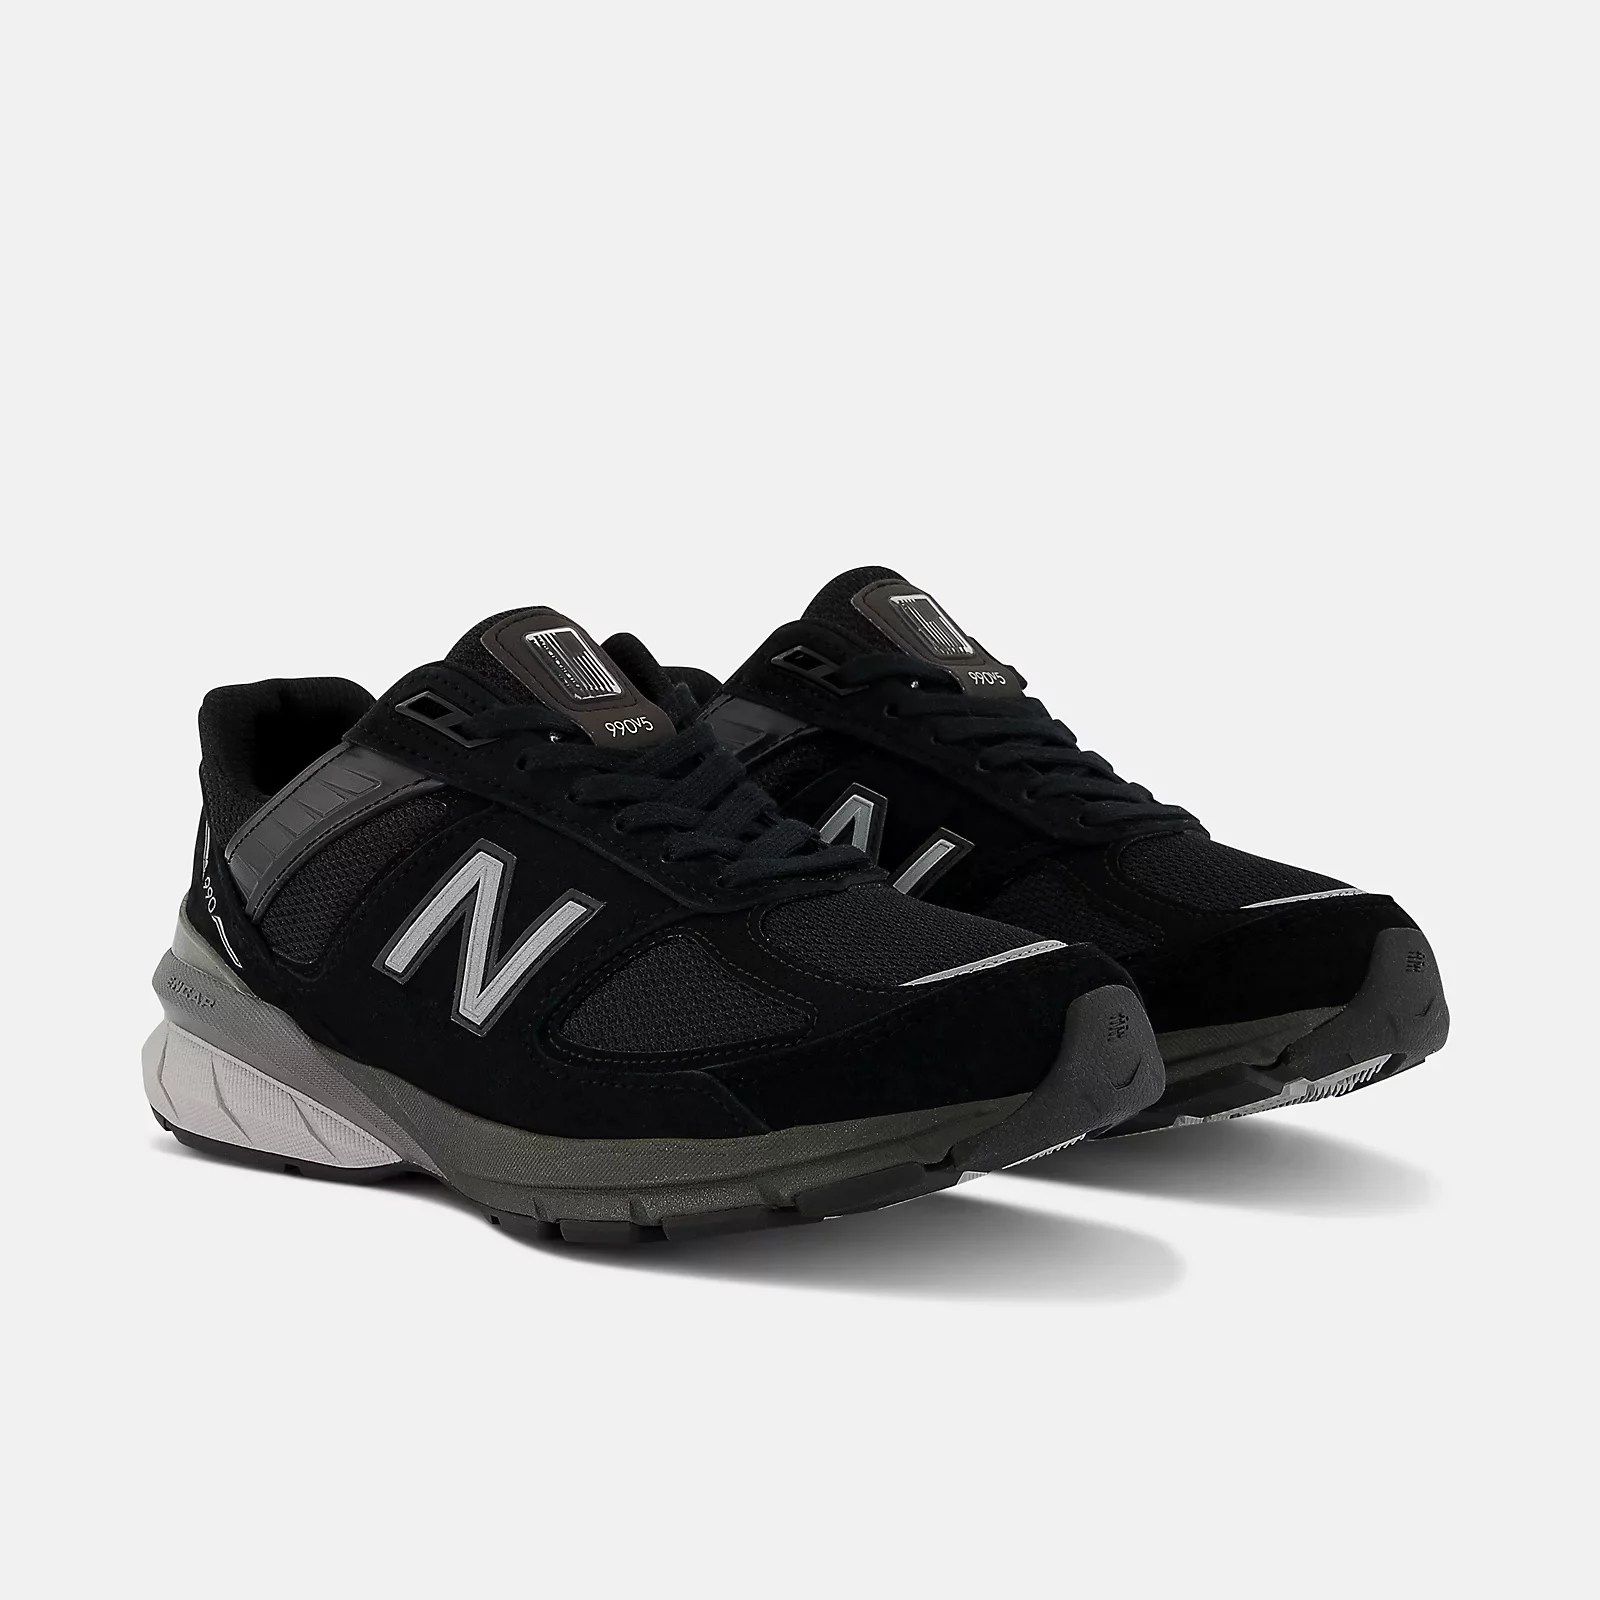 a black pair of new balance 990v5 shoes